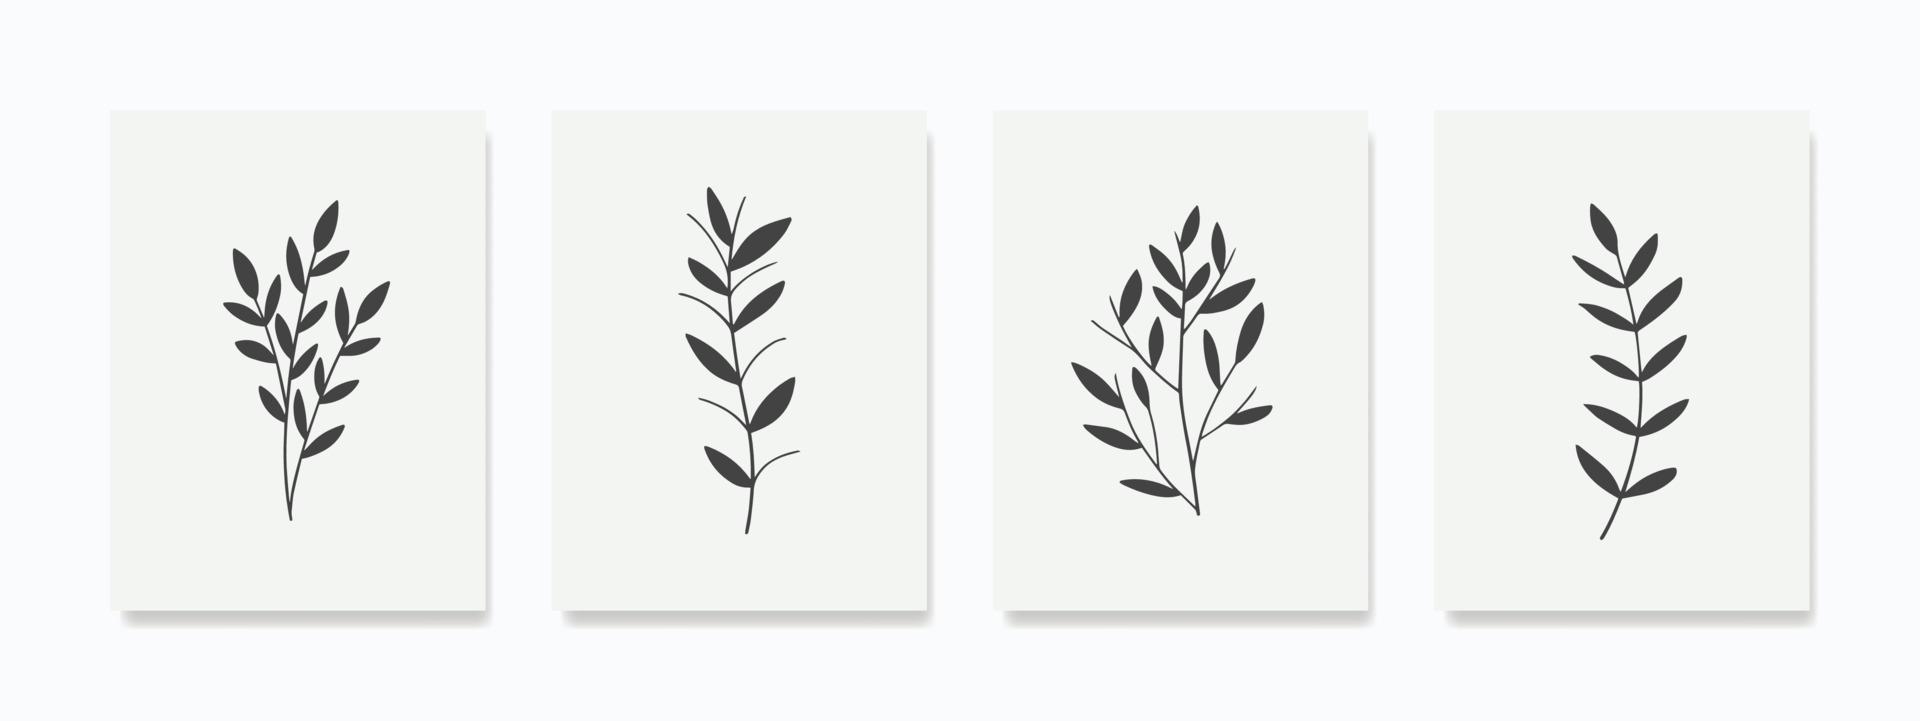 Minimalist black and white leaf wall art. Wall decor for home decor, posters, wallpapers, cards, and backgrounds. vector